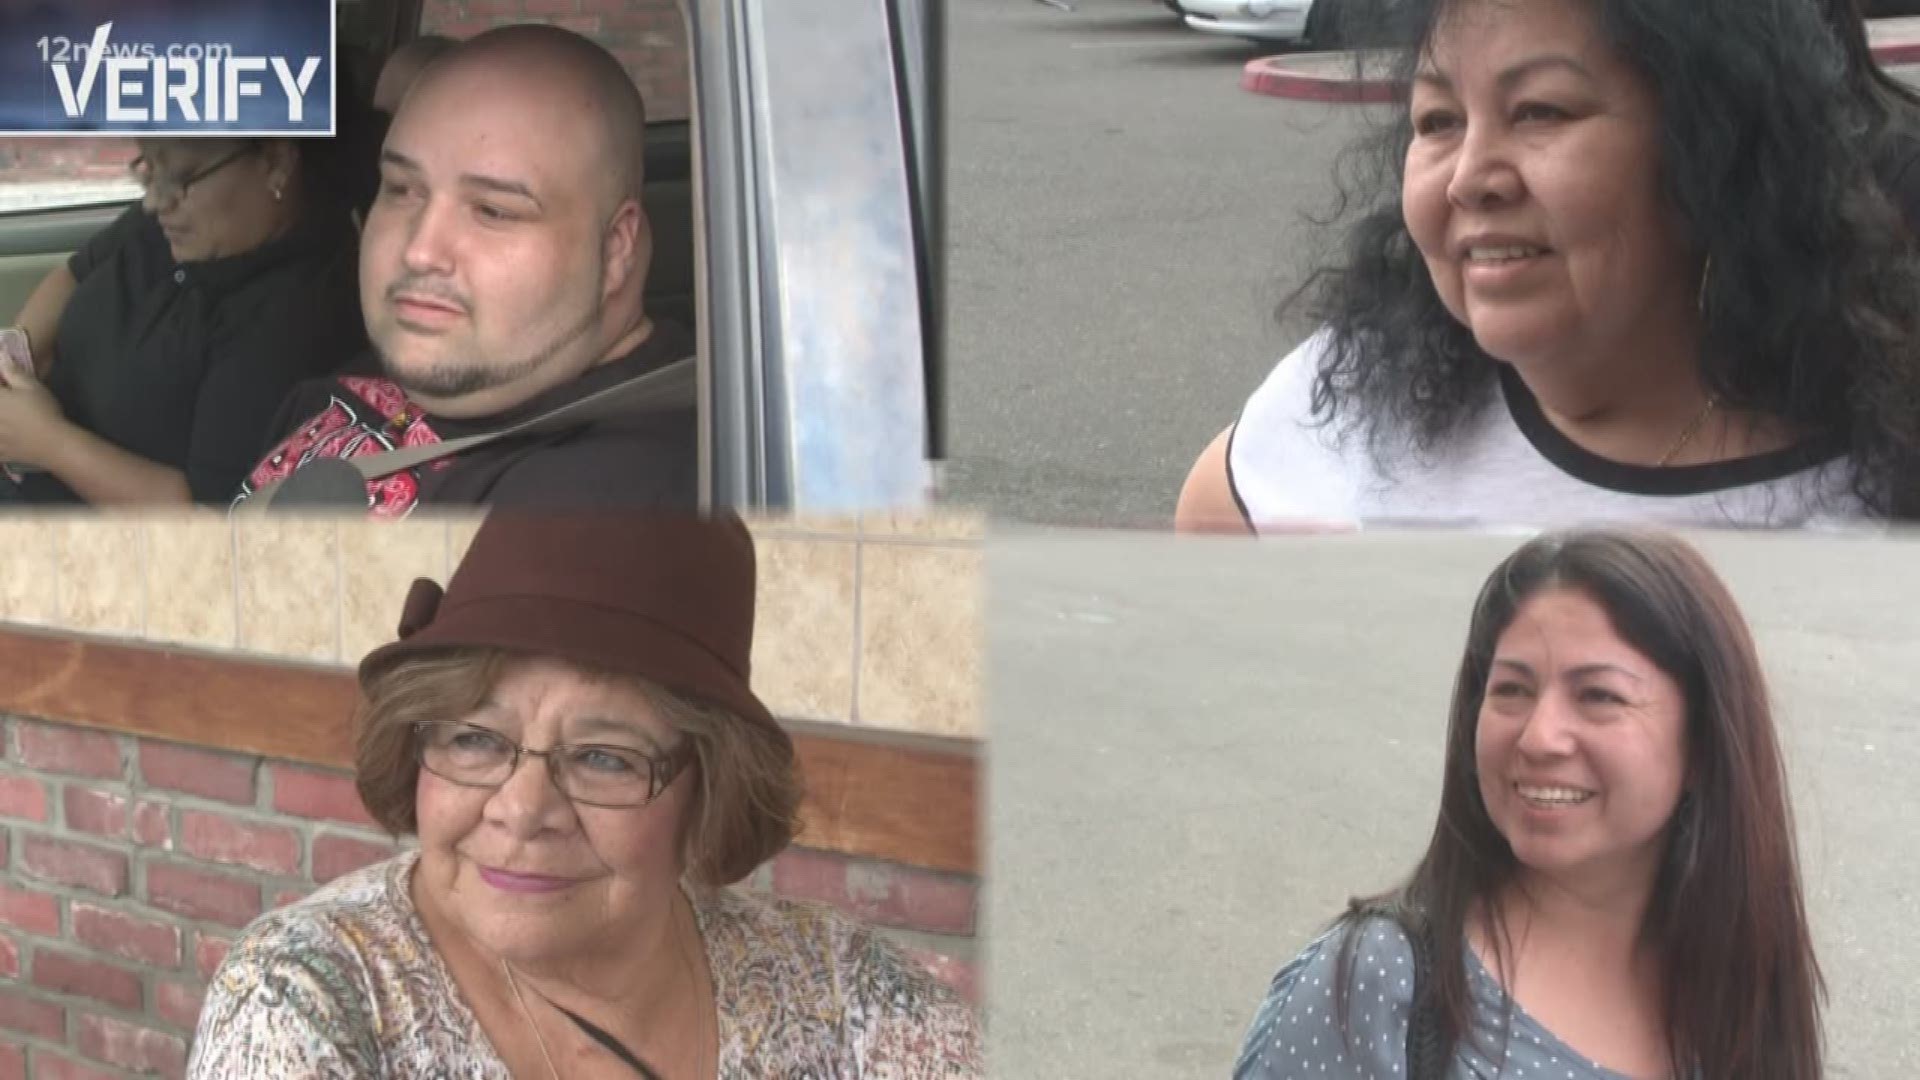 We caught up with four Latino voters today while Governor Doug Ducey and Senate candidate Martha McSally were at an event for Latinos. We asked how they were going to vote and what issues are most important to them.